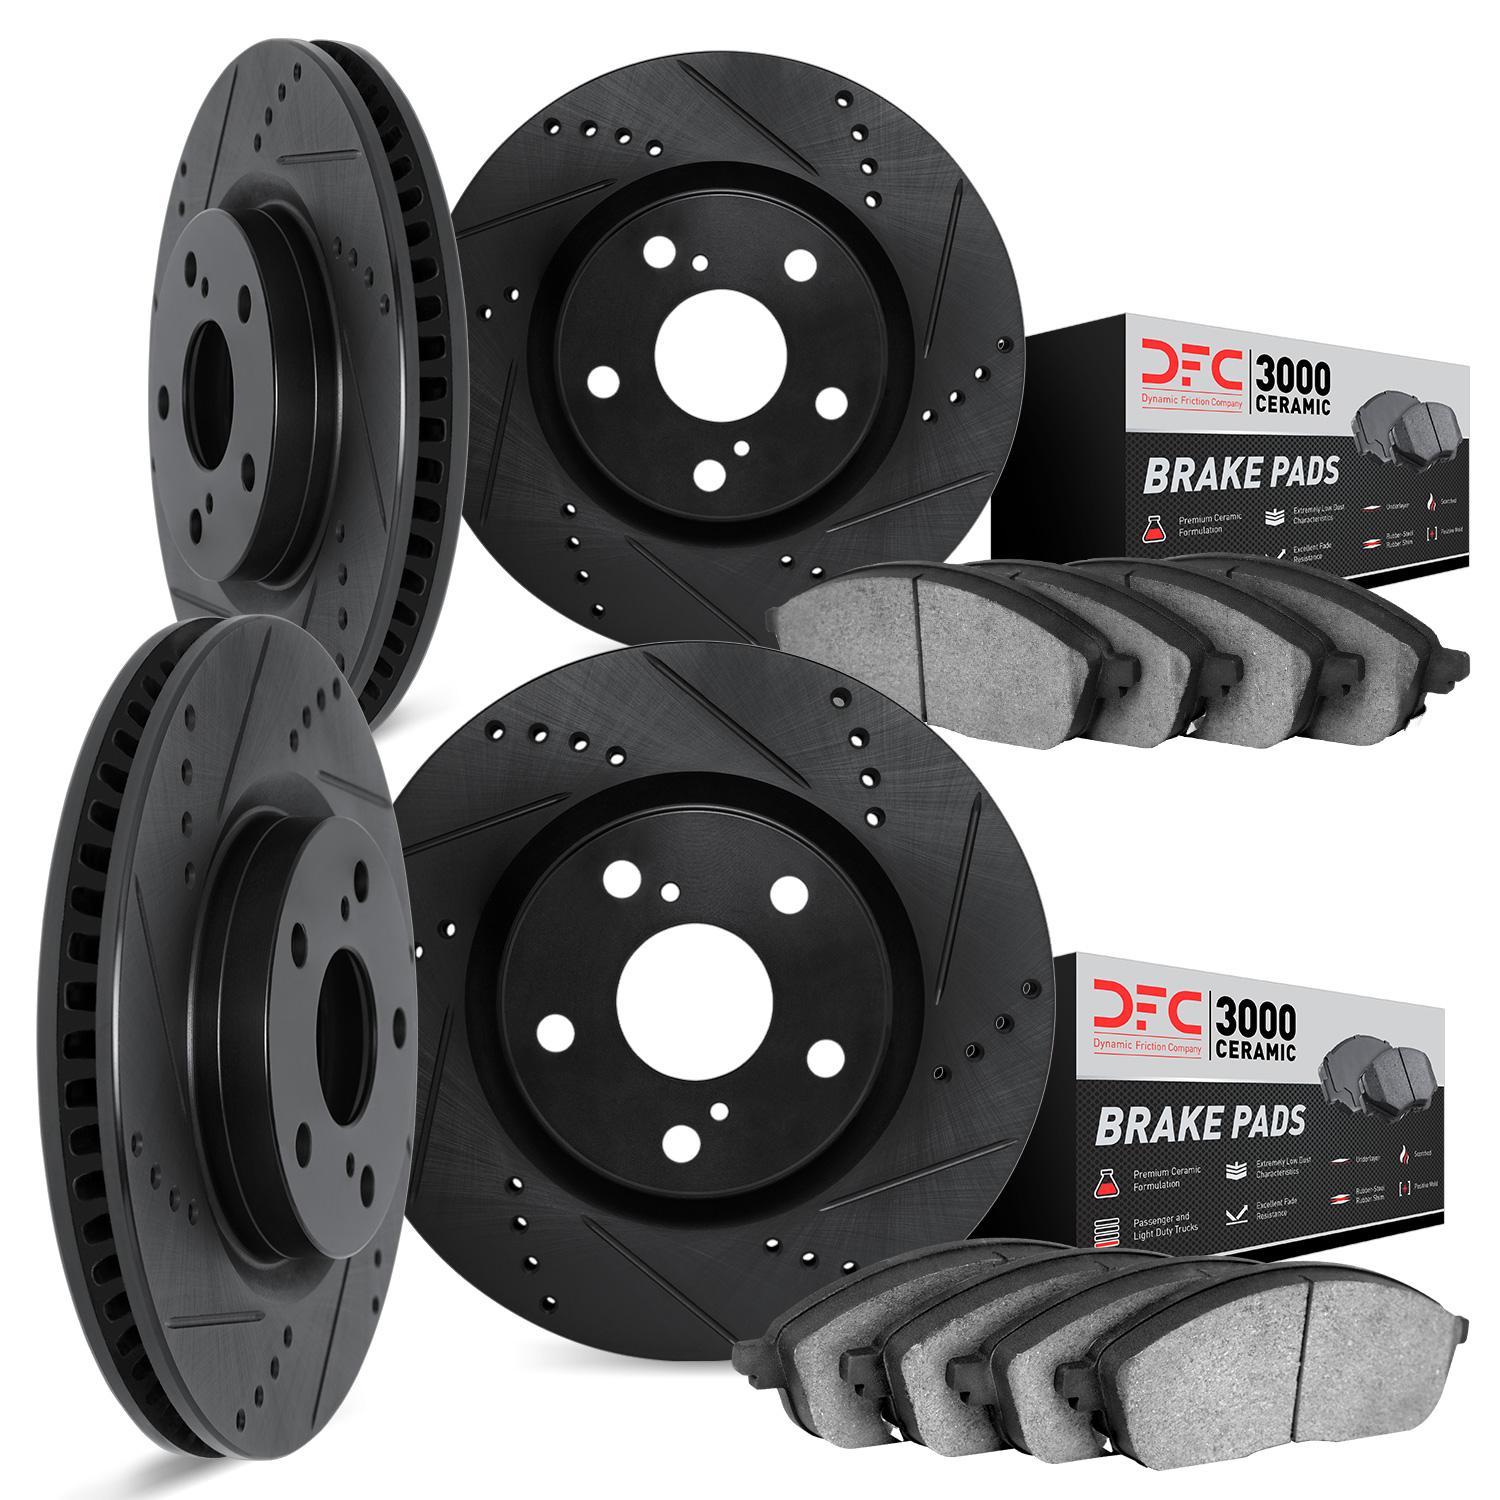 8304-40017 Drilled/Slotted Brake Rotors with 3000-Series Ceramic Brake Pads Kit [Black], 2003-2003 Mopar, Position: Front and Re